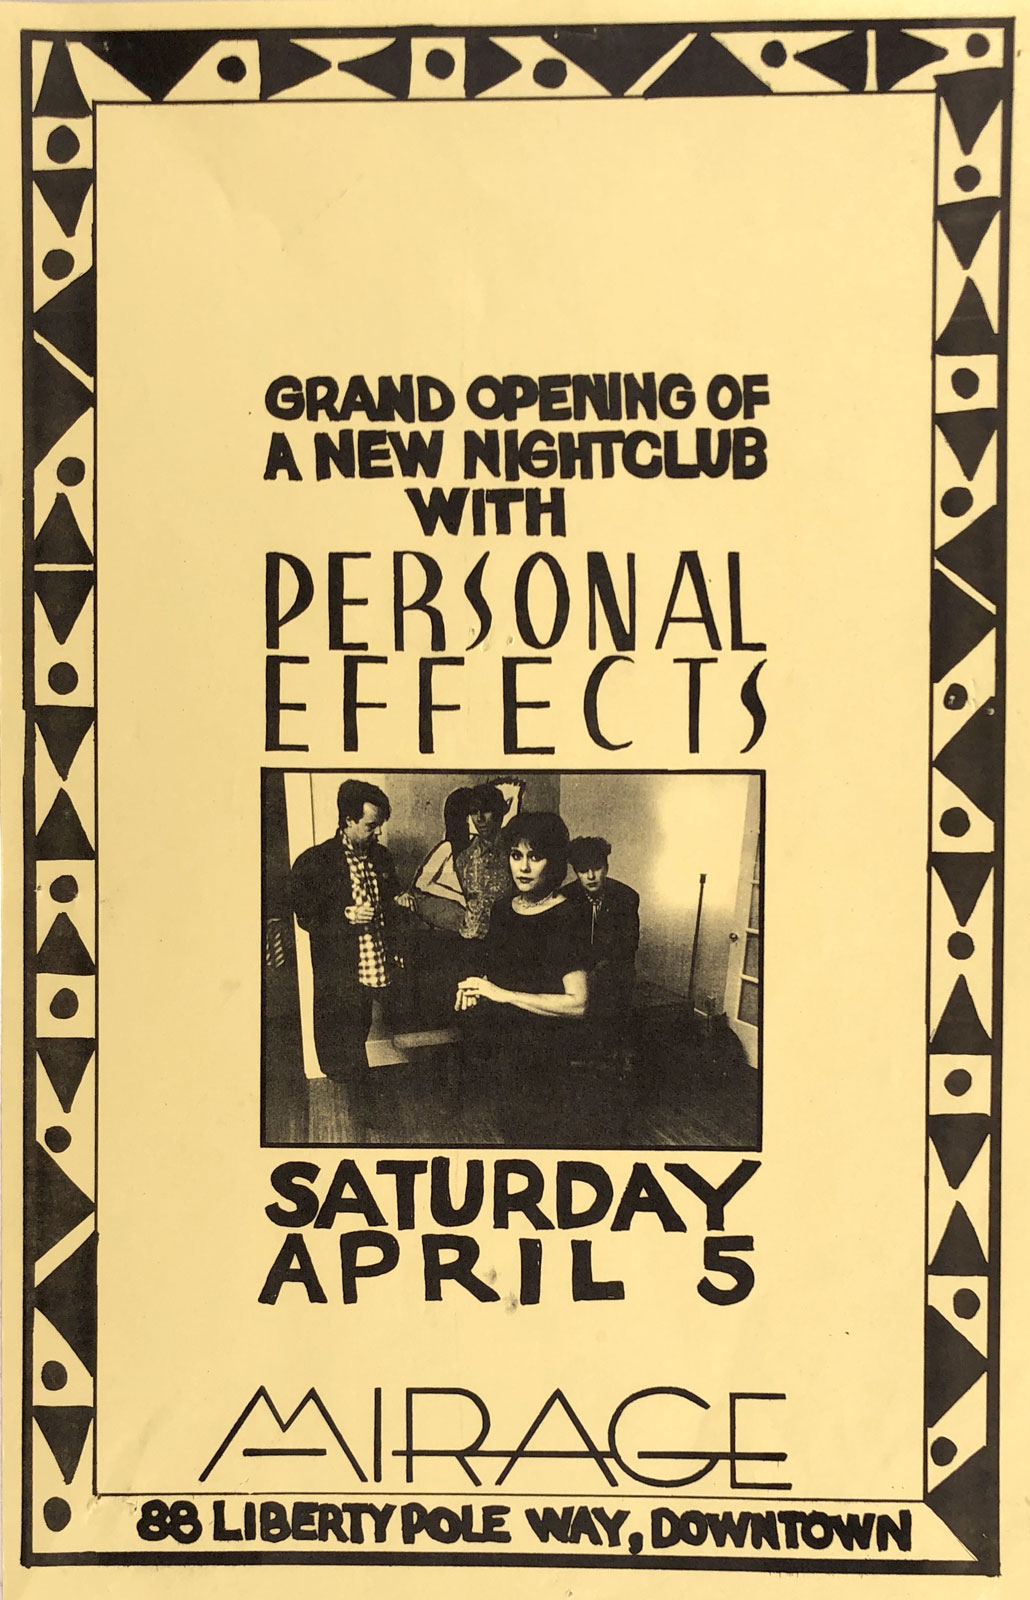 Poster for Personal Effects at Mirage in Rochester, New York on 04.05.1986. This was the grand opening of Mirage on Liberty Pole Way.